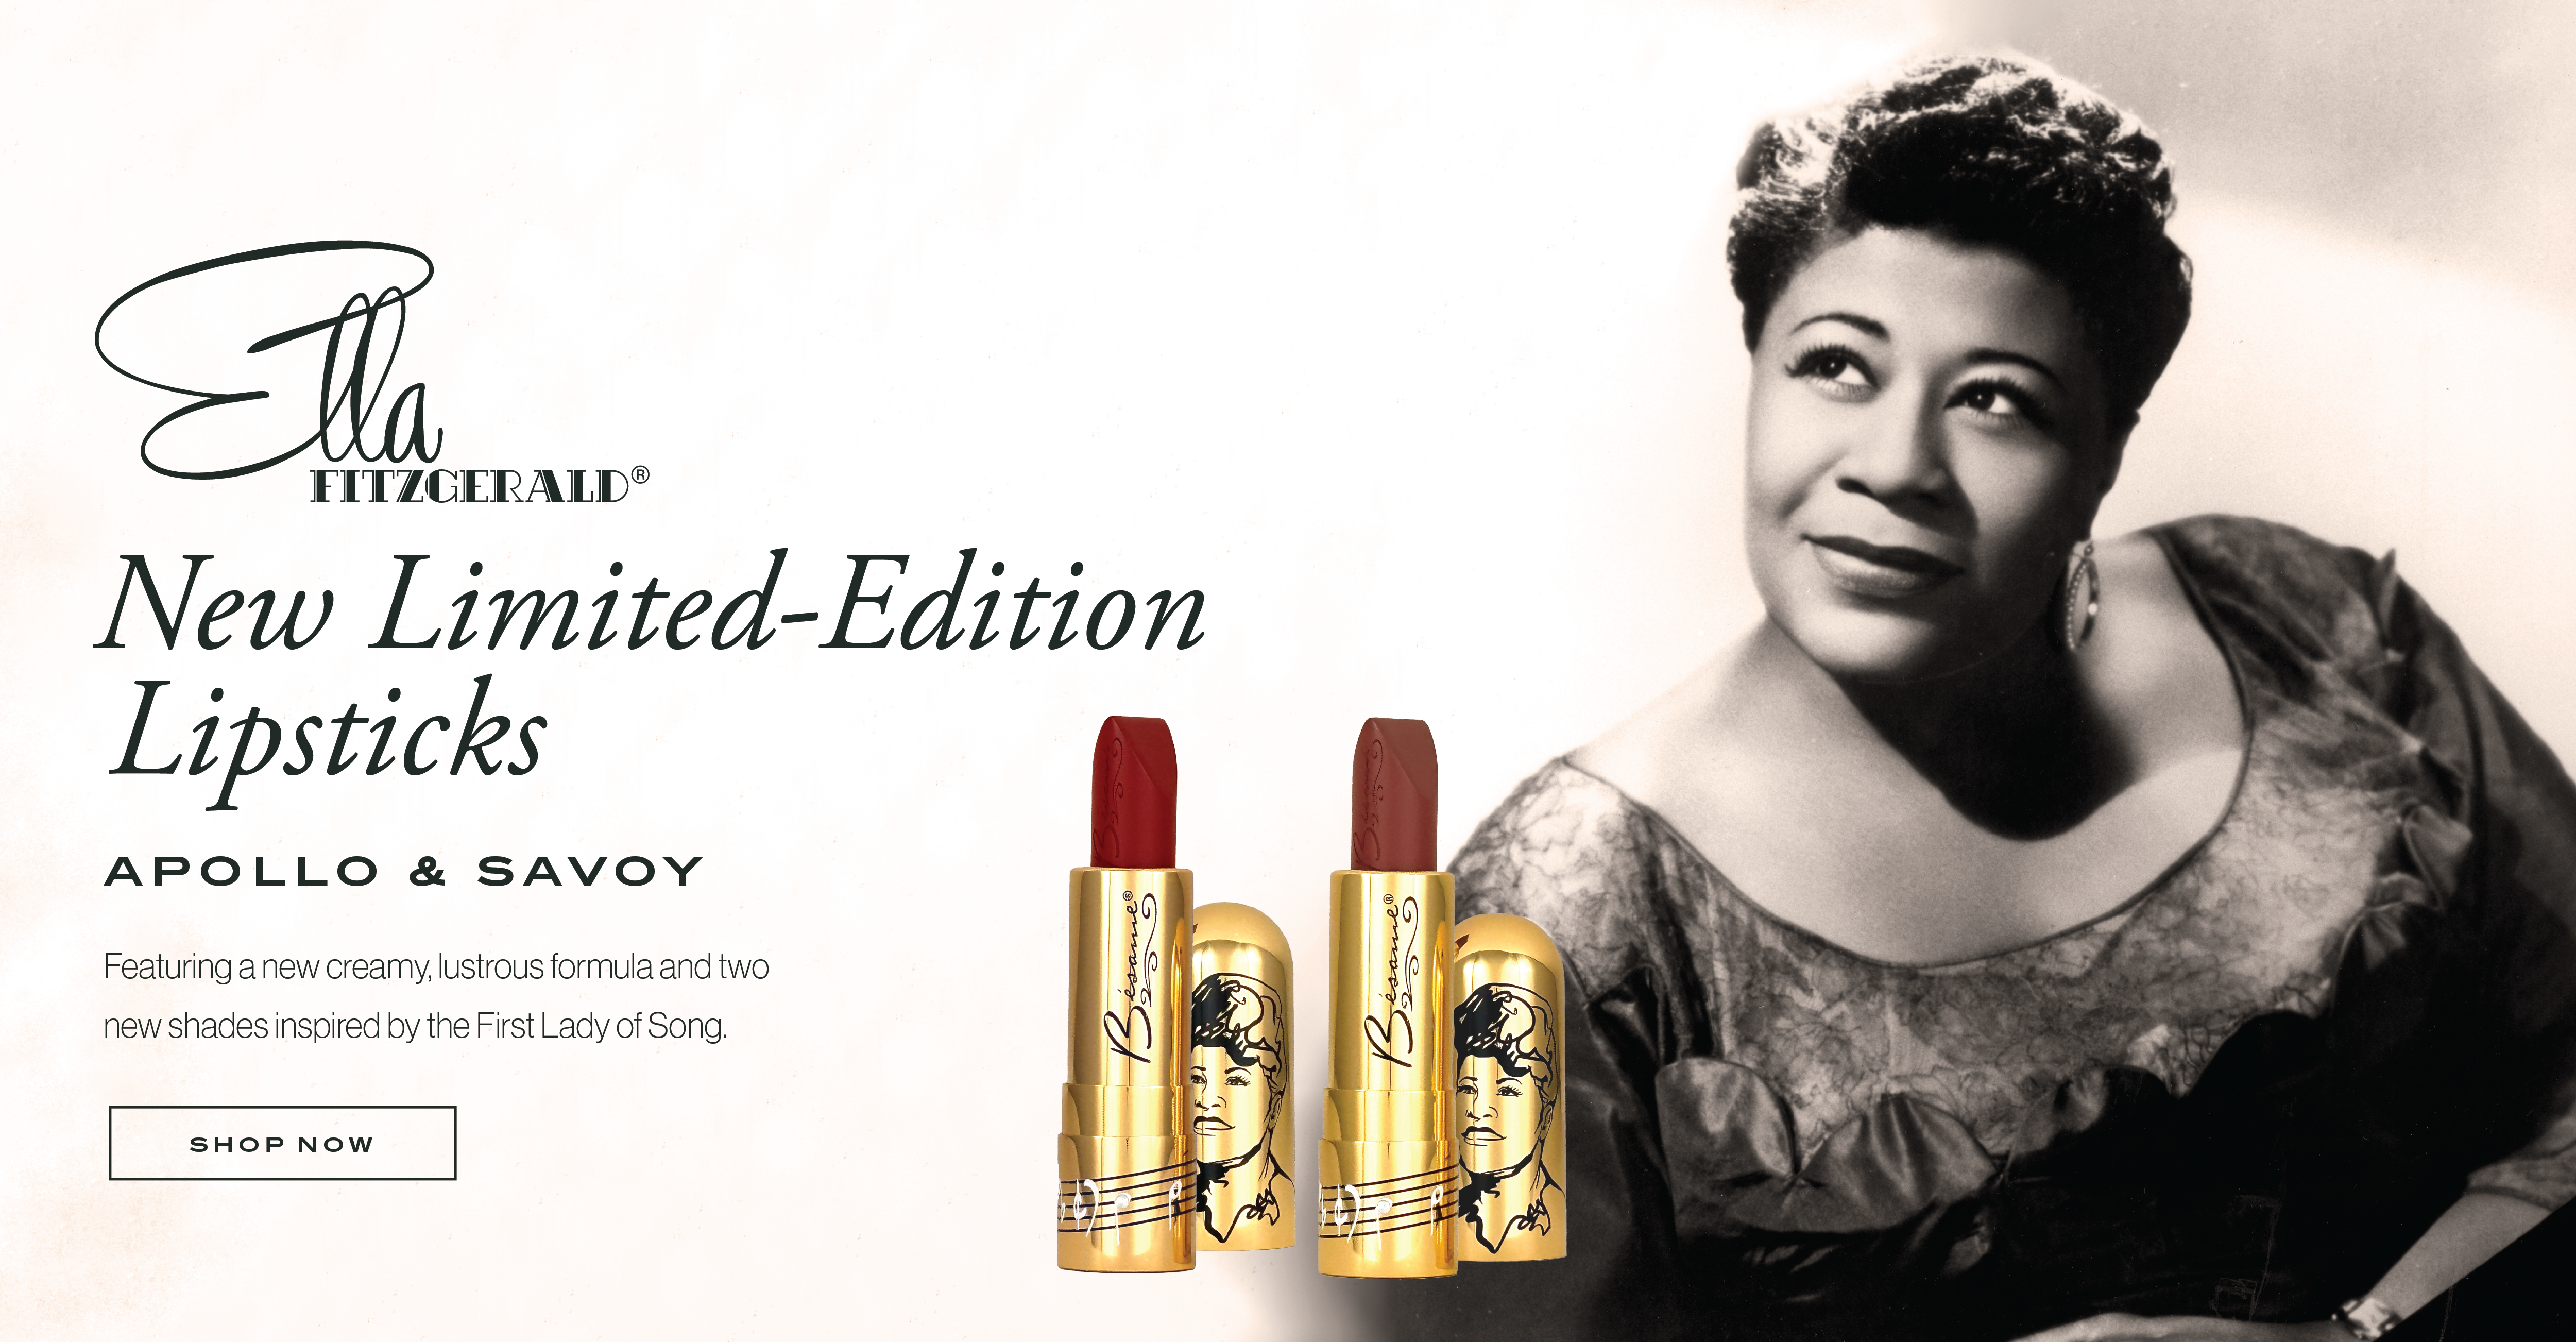 ella fitzgerald limited collection